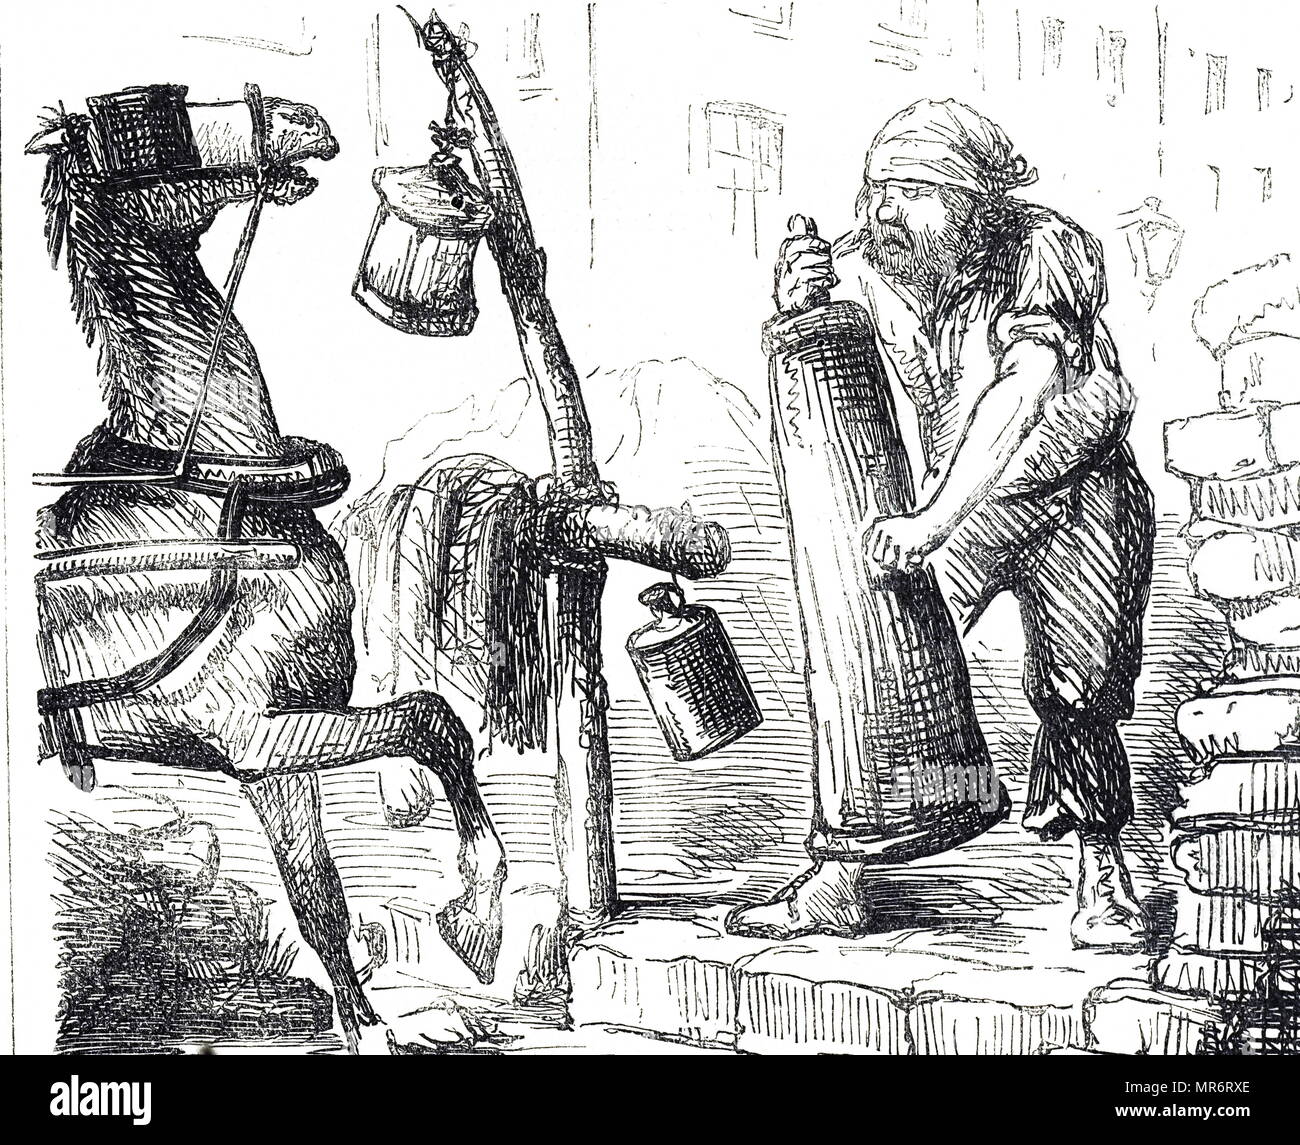 1861 cartoon illustration showing a road builder ramming paving and kerb blocks into place and frightening a horse with the sudden noise. Stock Photo